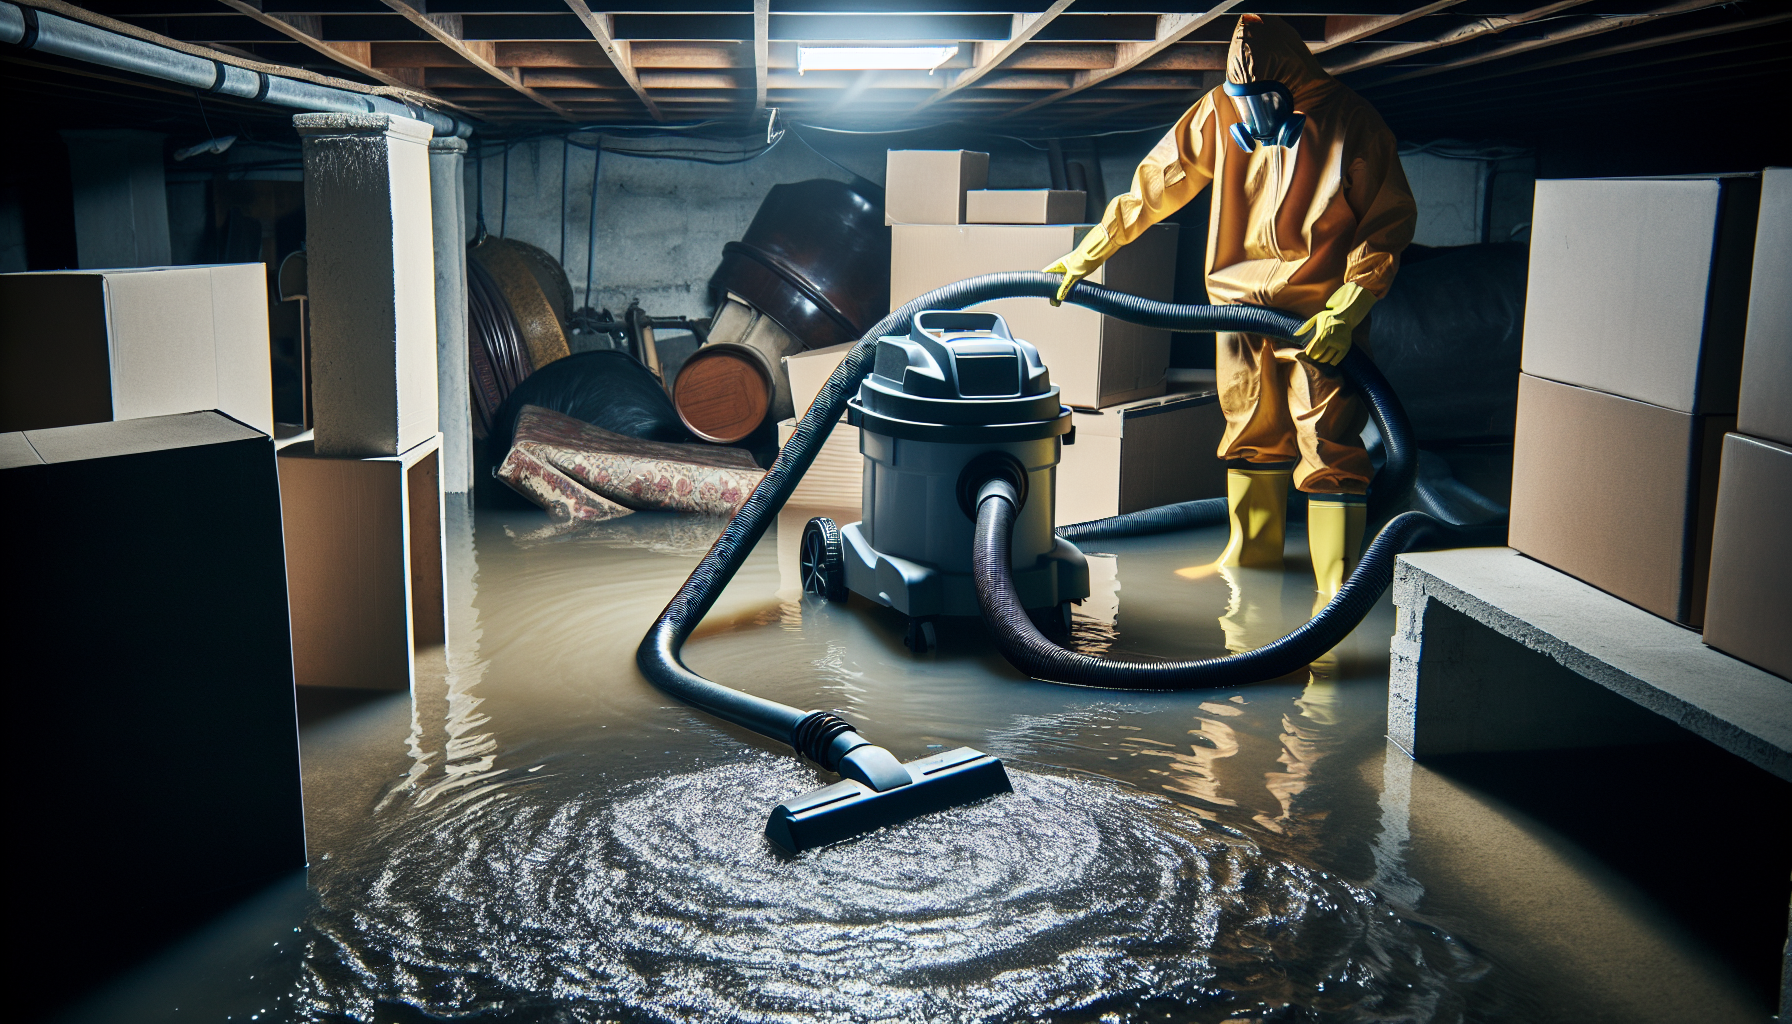 A wet vacuum being used to remove water from a flooded basement